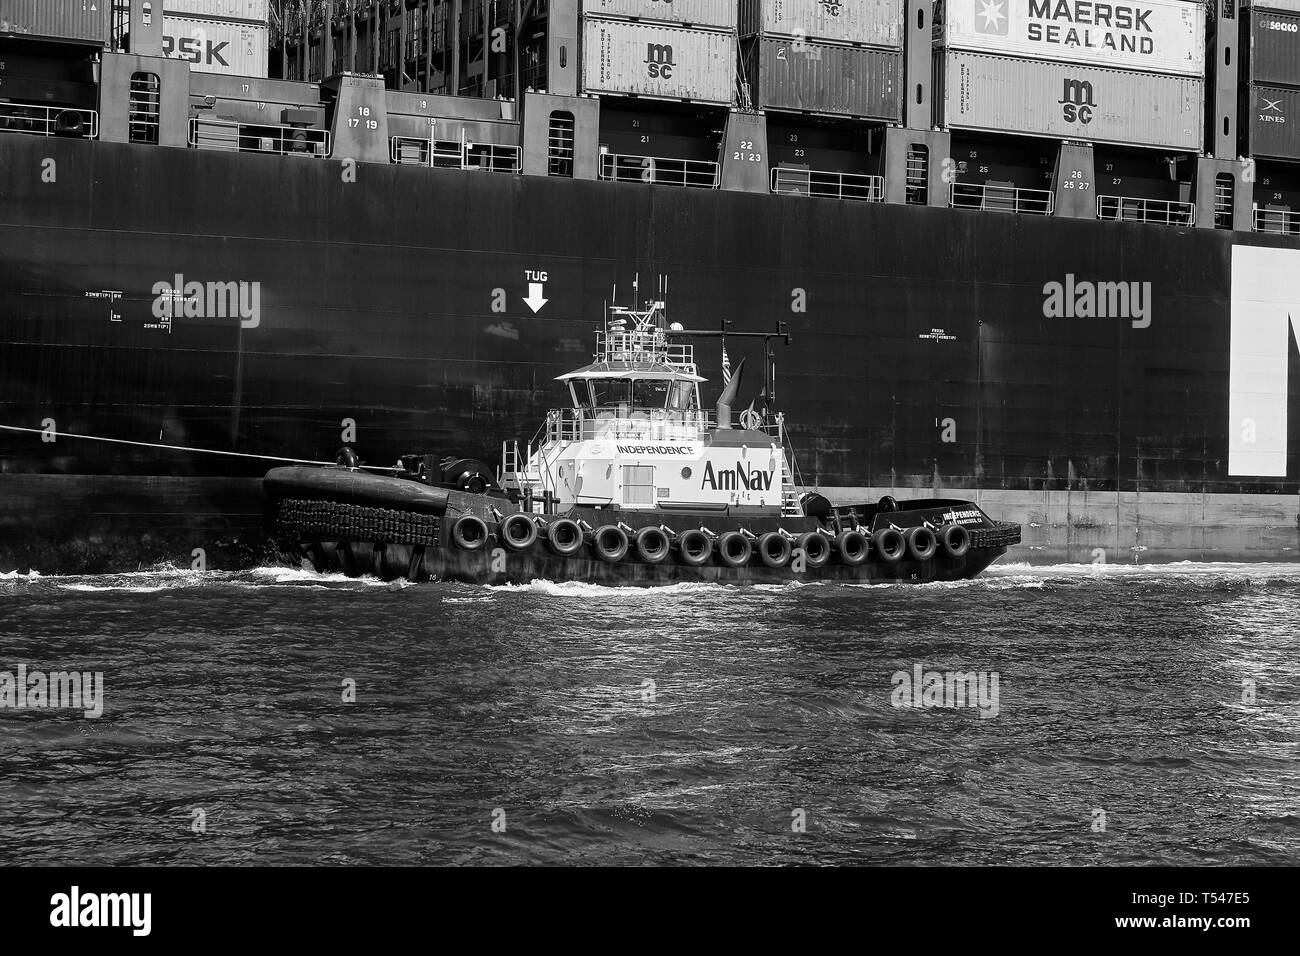 Black And White Photo Of The AmNav Tractor Tug (Tugboat), INDEPENDENCE, Escorting Container Ship, MSC ELODIE In The Port Of Long Beach, California. Stock Photo